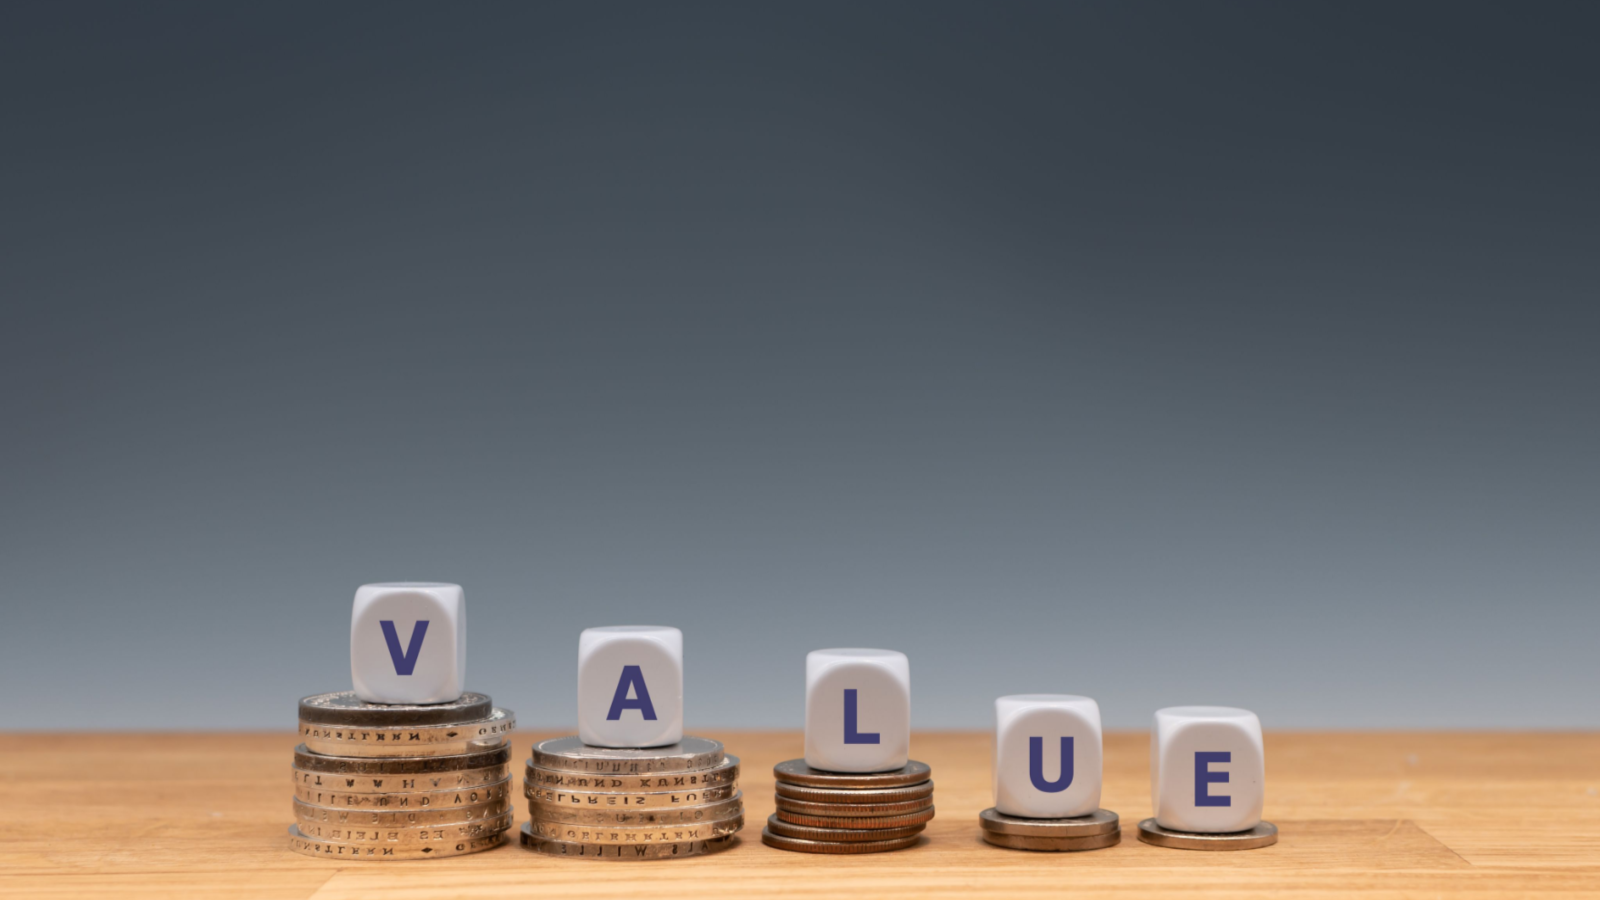 Deep Value Stocks - 7 Overlooked Deep Value Stocks Worthy of Your Attention